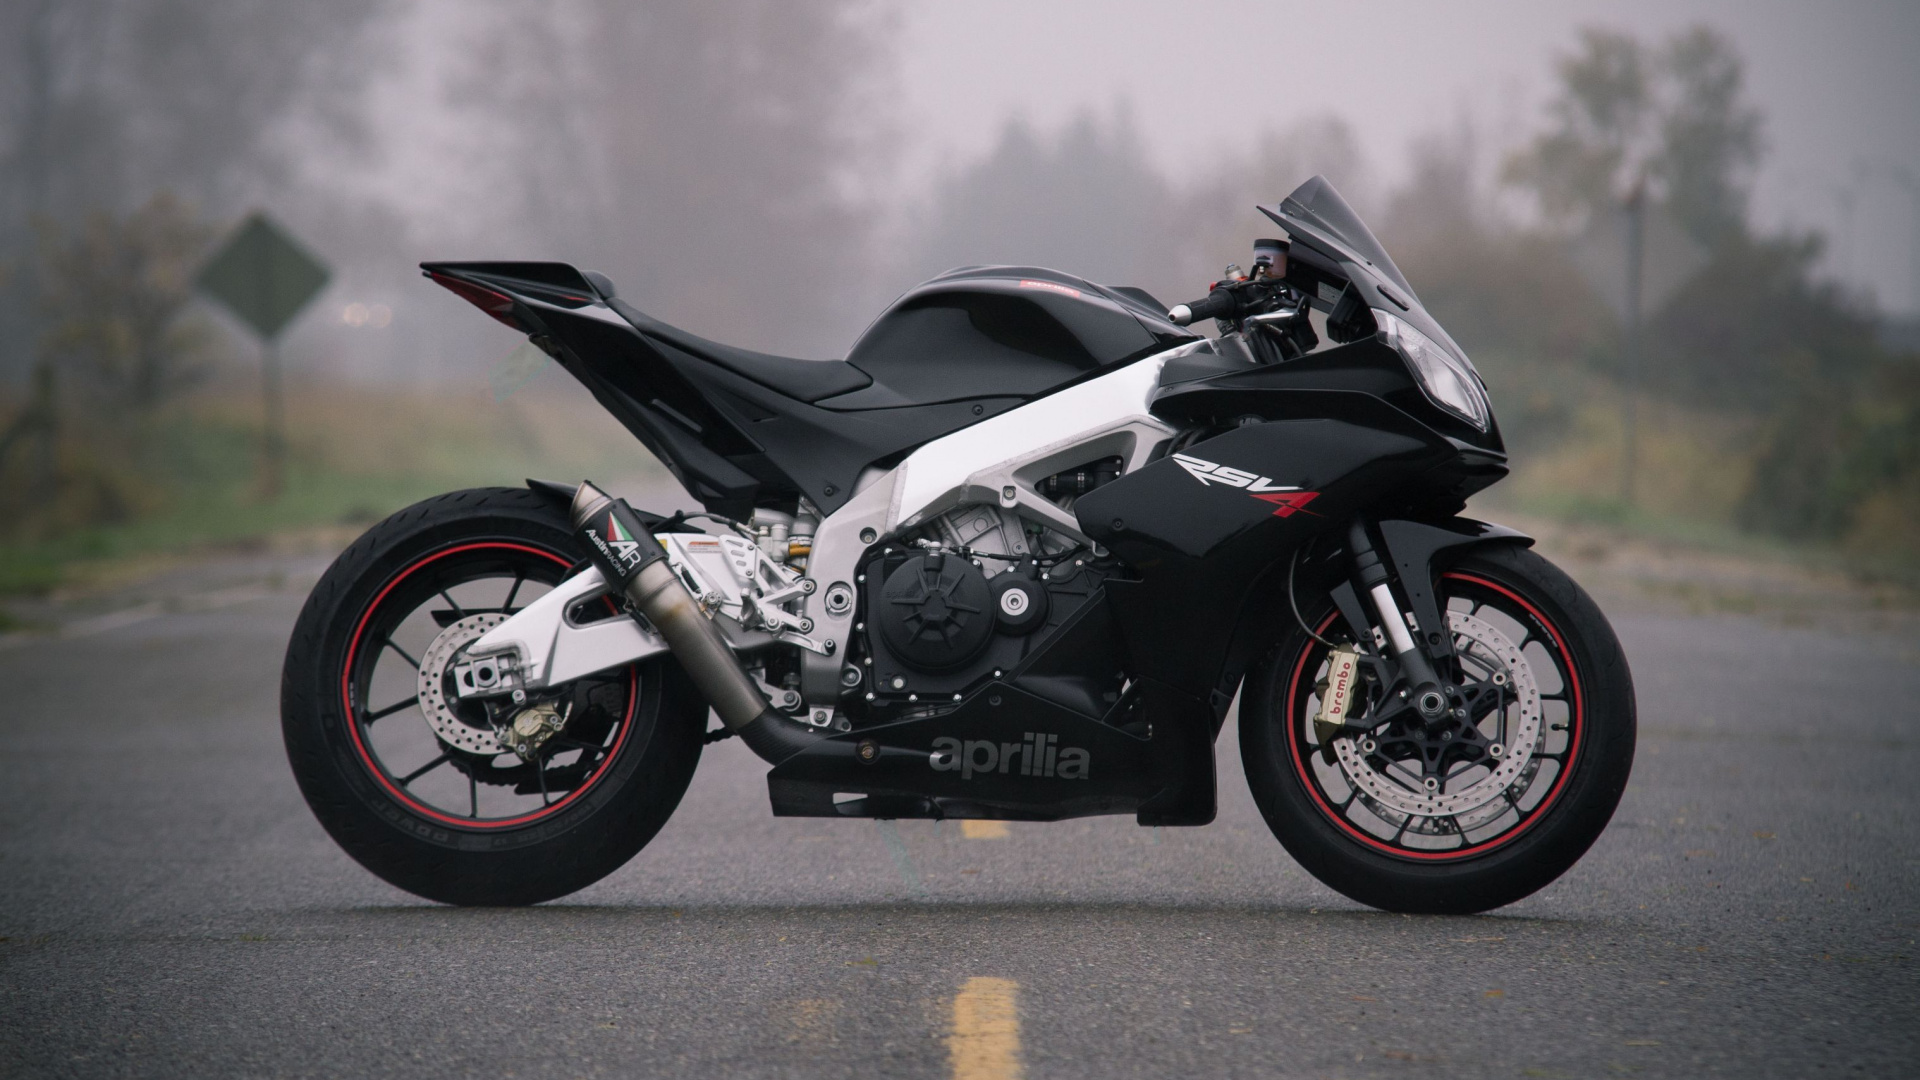 Black and Gray Sports Bike on Road During Daytime. Wallpaper in 1920x1080 Resolution